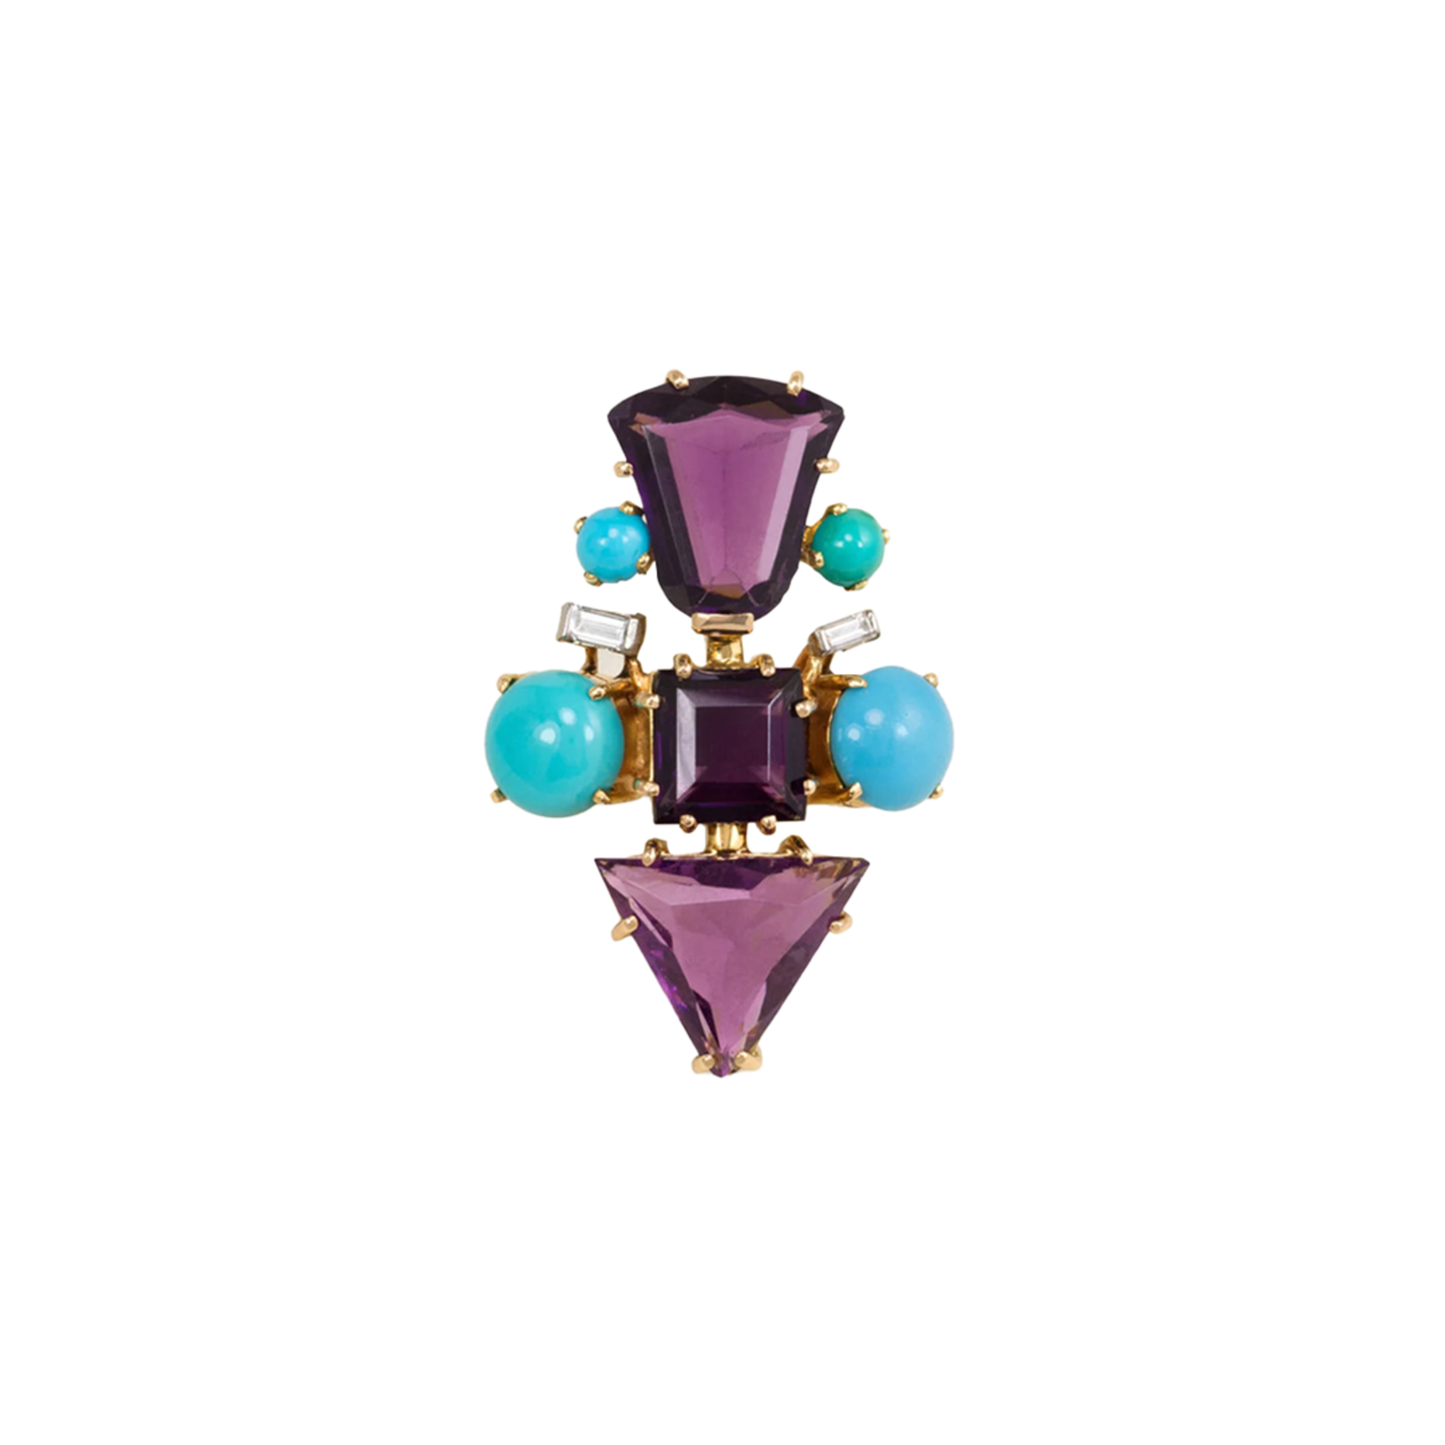 French 1950s 18KT Yellow Gold Amethyst, Diamond & Turquoise Ring front view